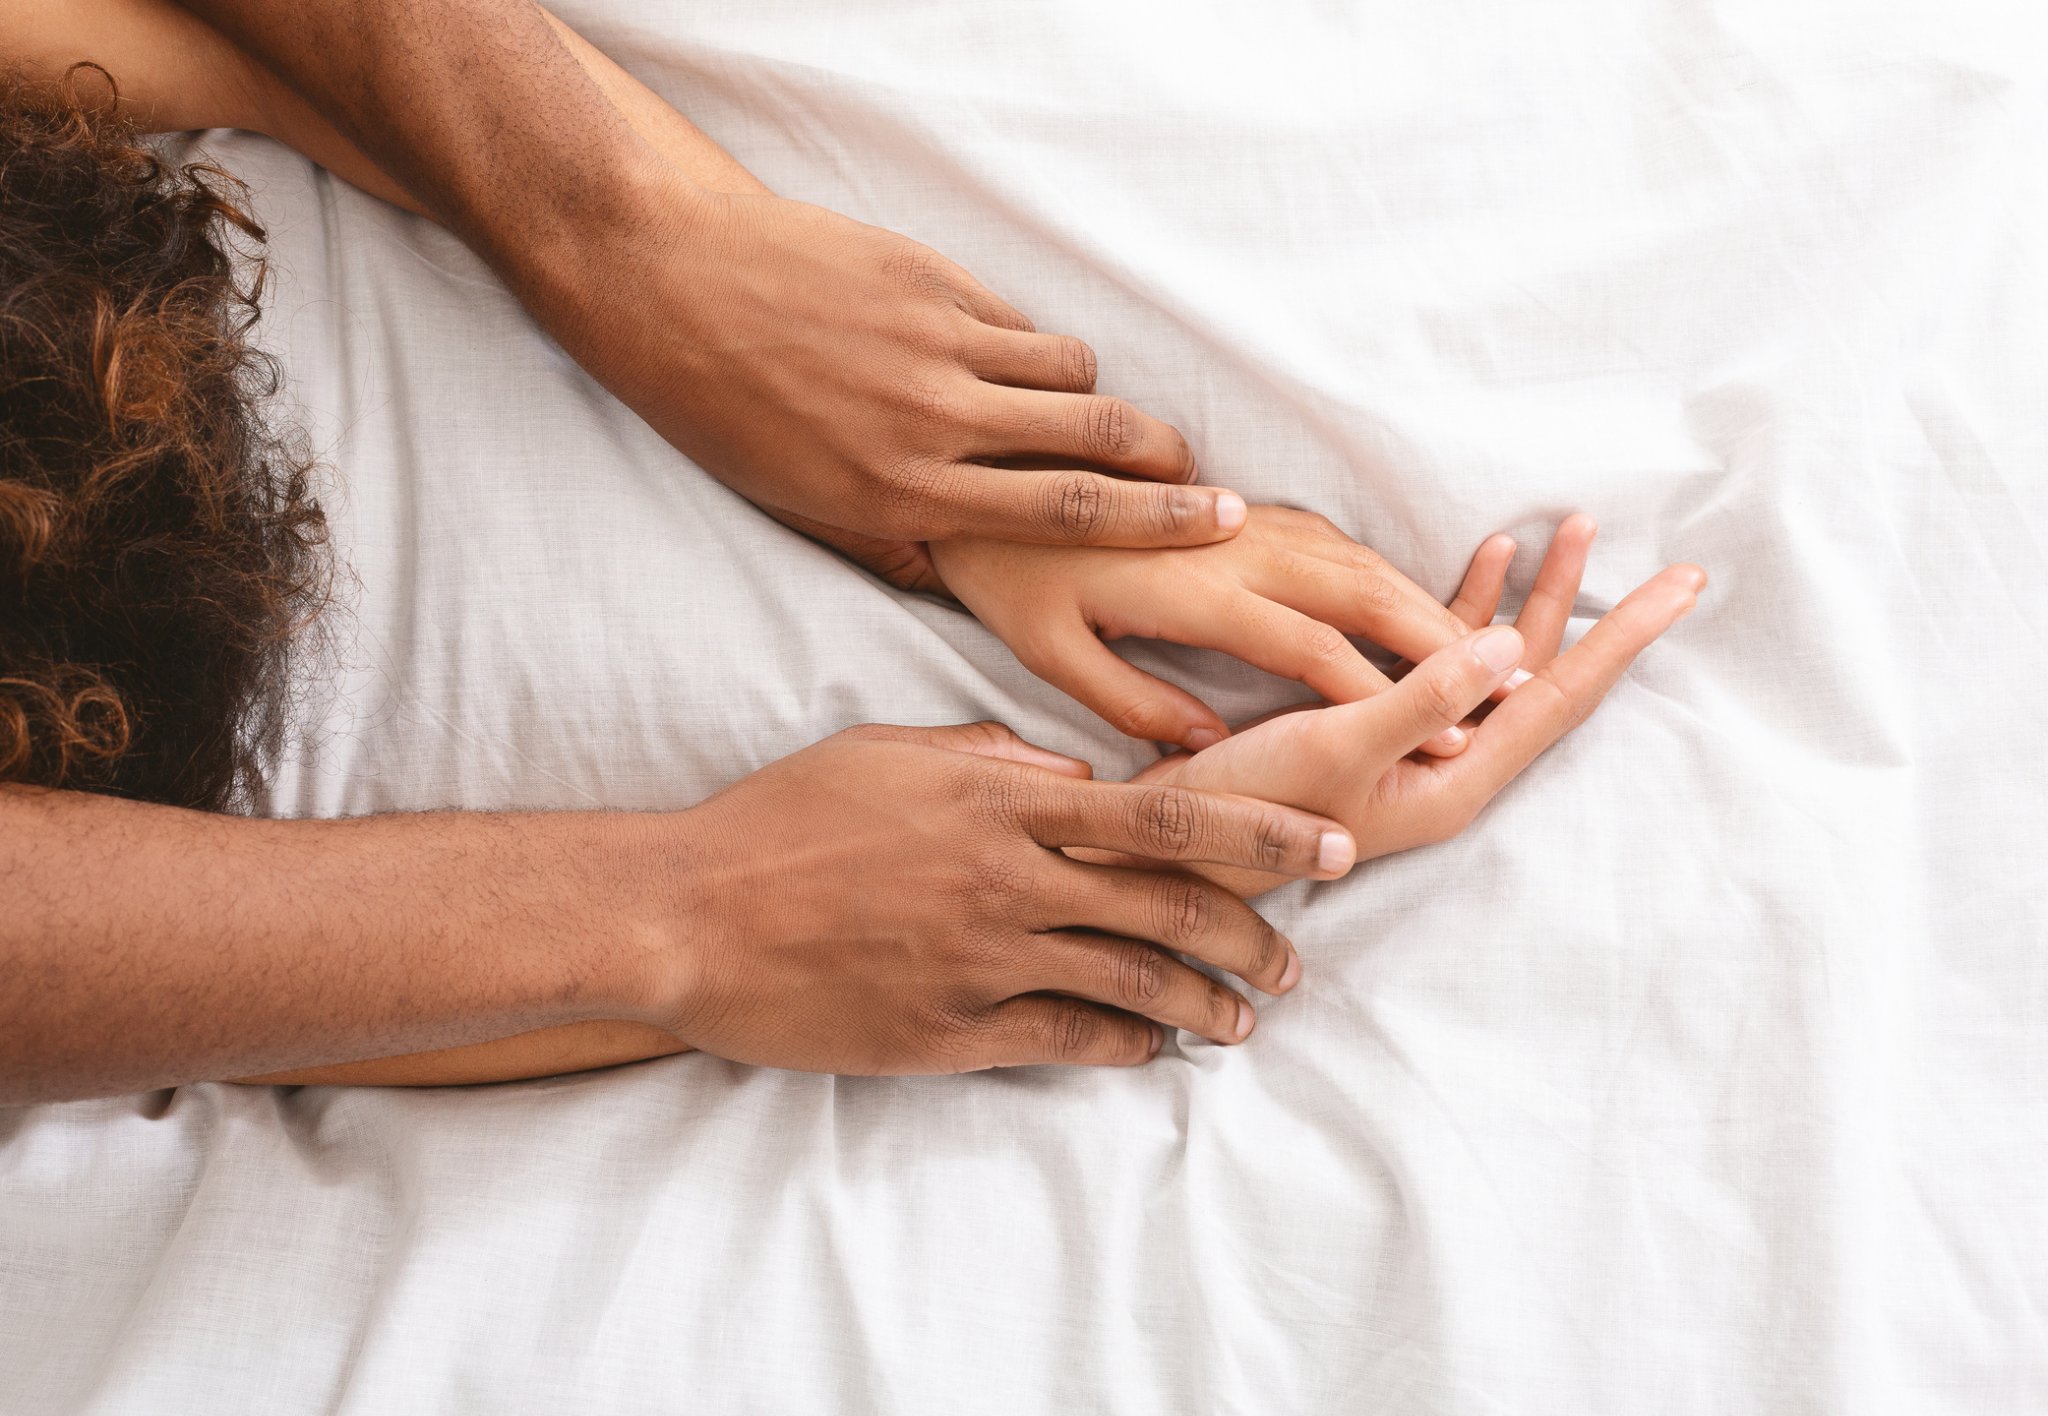 Spice things up in the bedroom with these underrated positions - cover